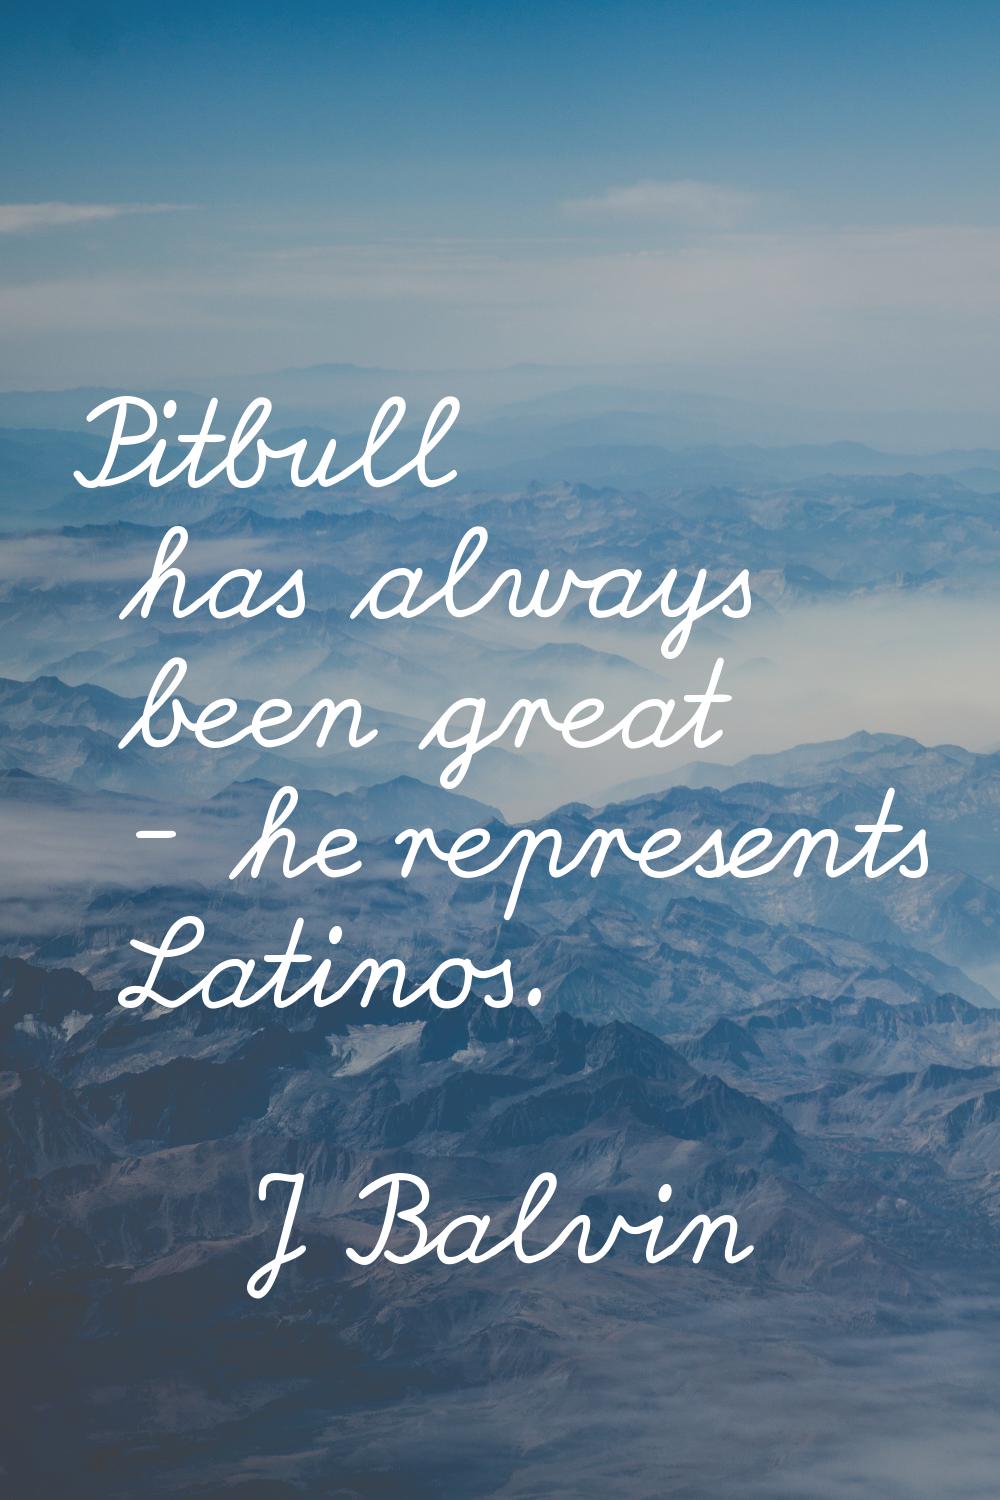 Pitbull has always been great - he represents Latinos.